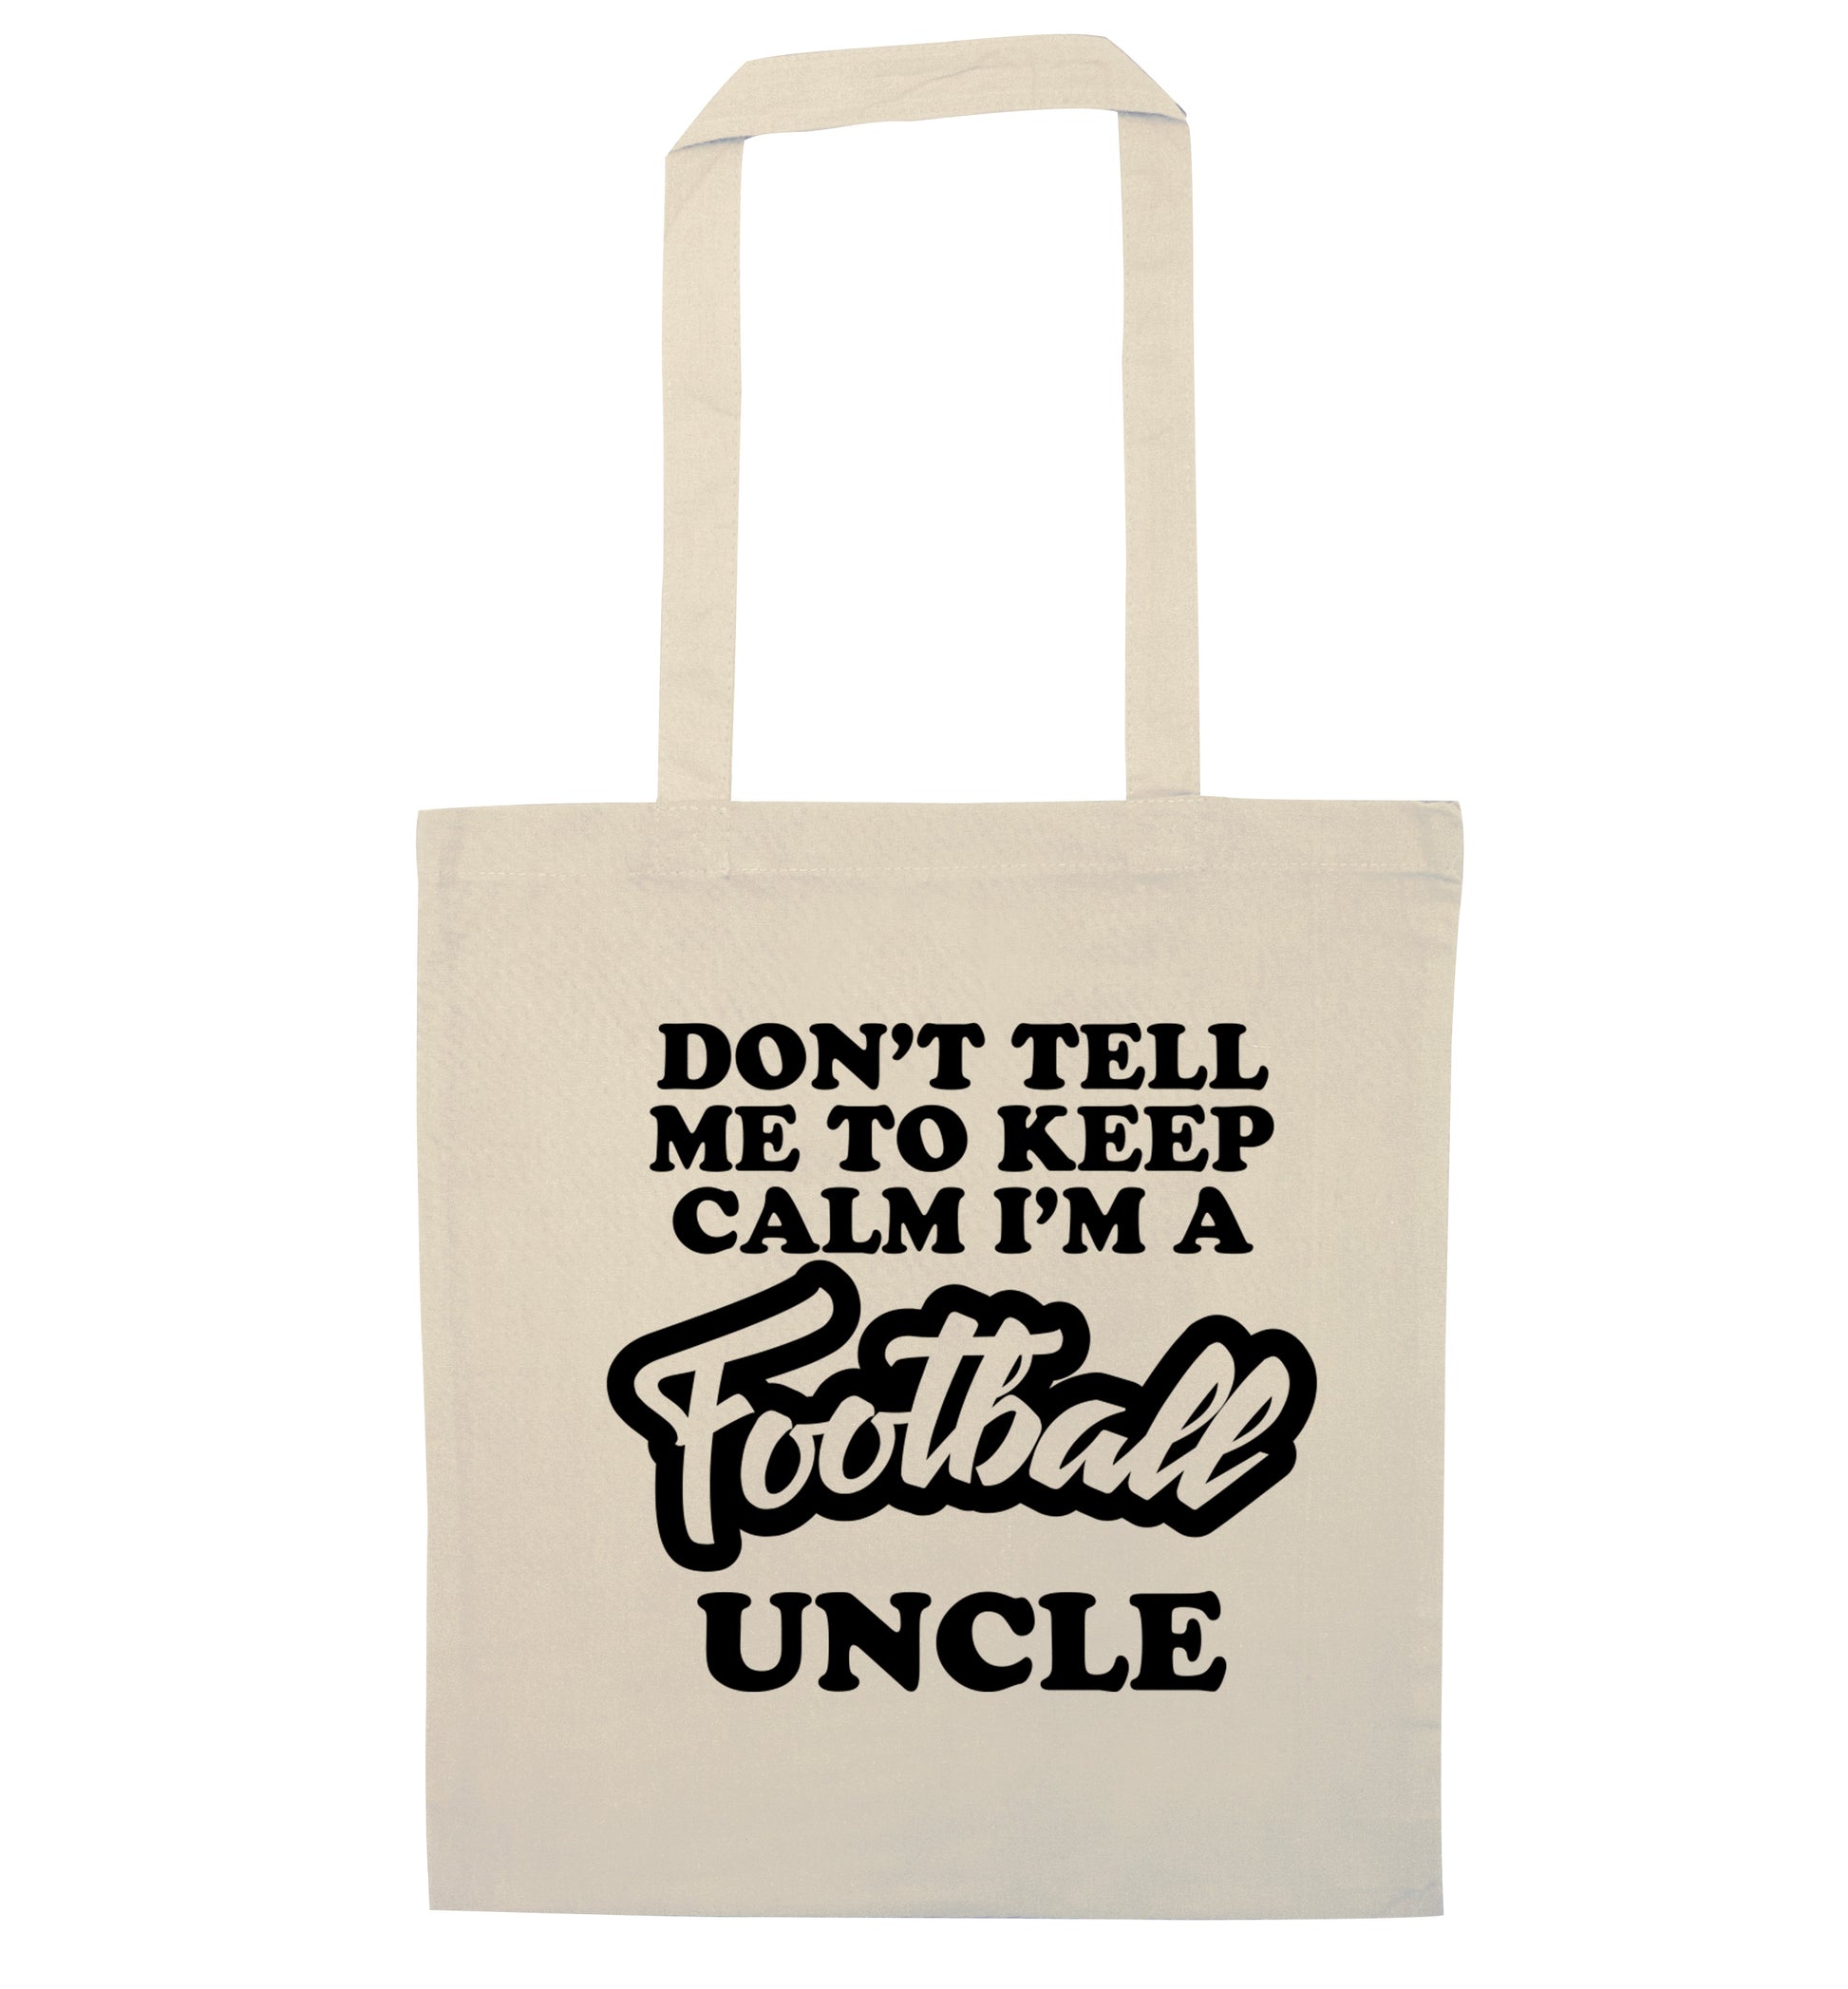 Don't tell me to keep calm I'm a football uncle natural tote bag